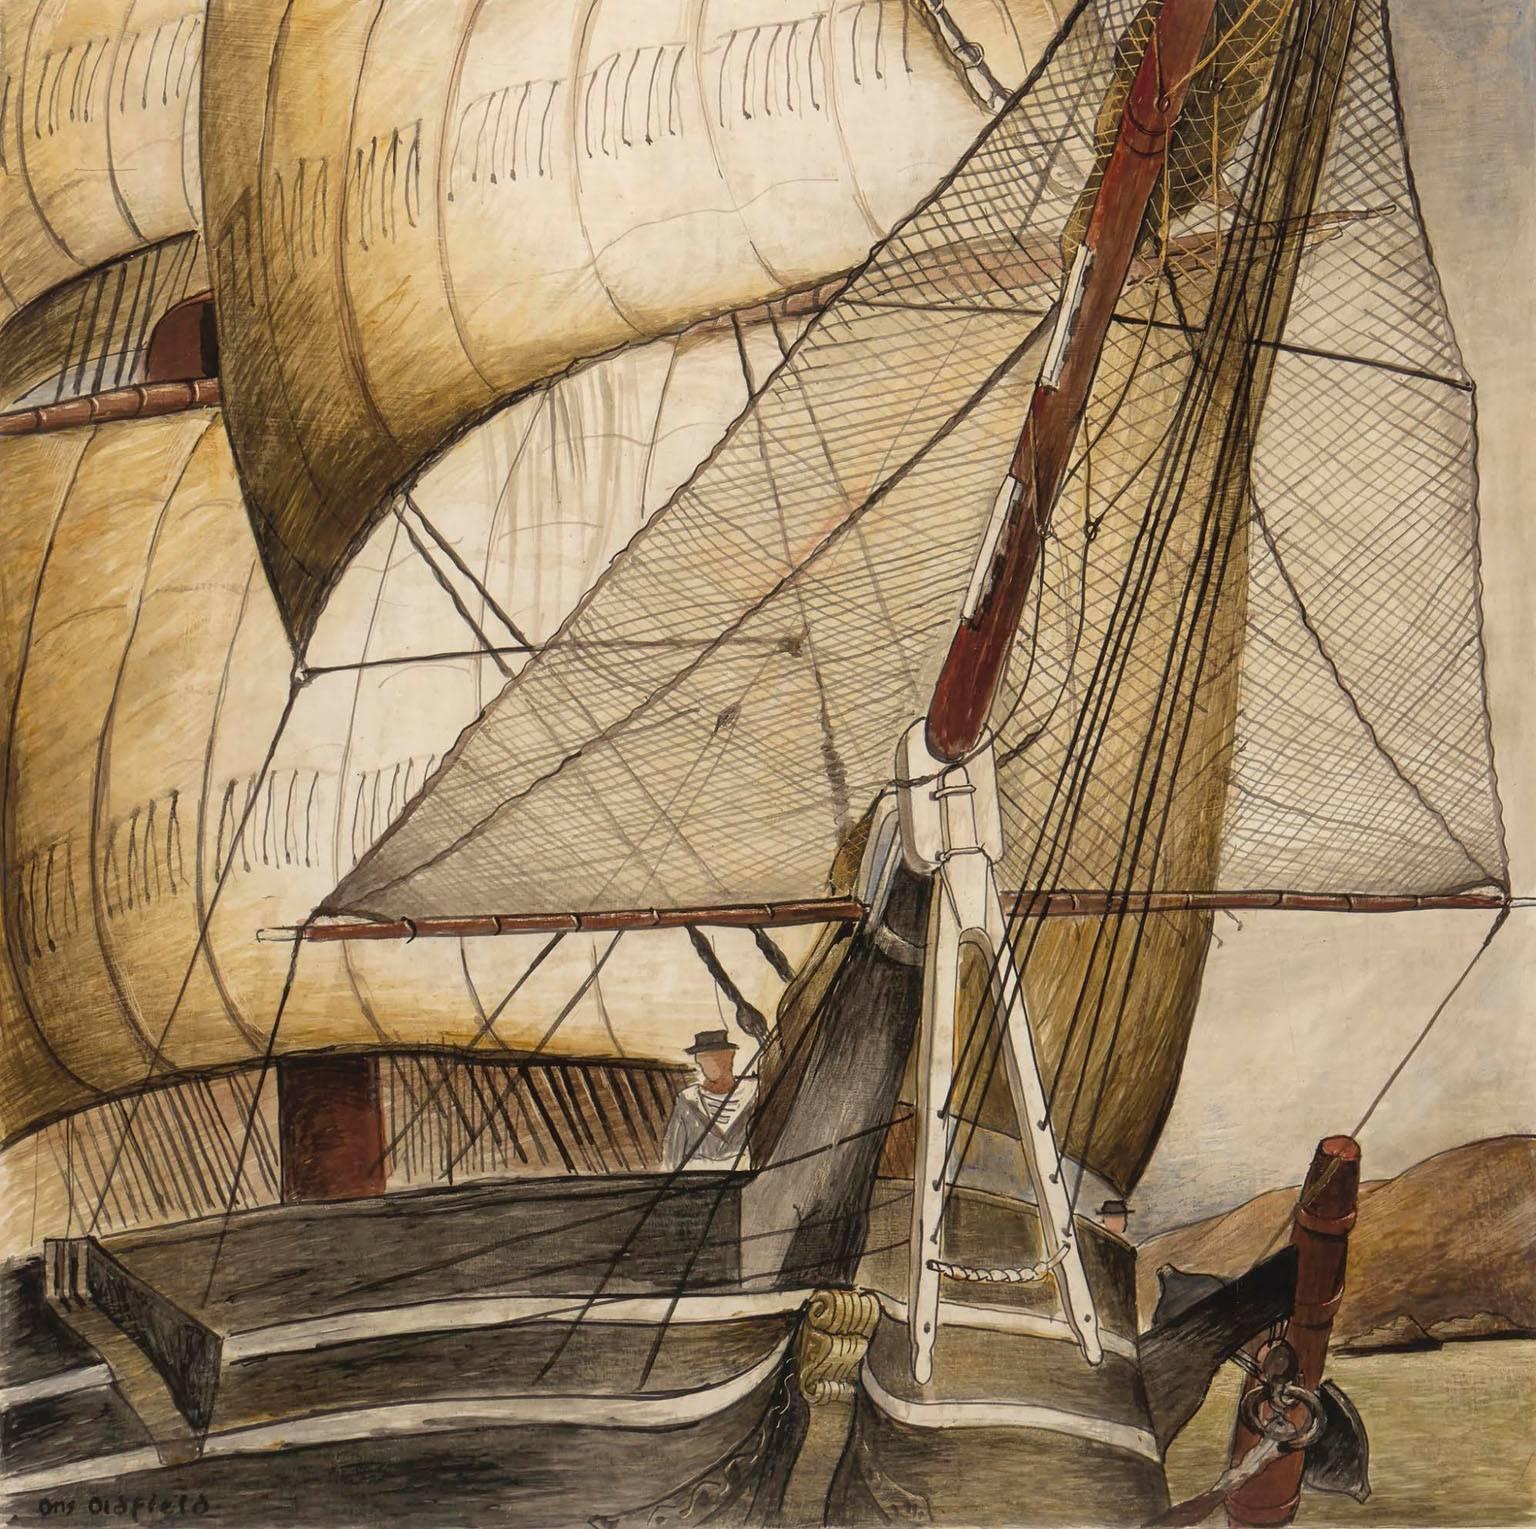 Otis Oldfield Landscape Painting - Sailing Ship of 1850s in San Francisco Bay - WPA Mural Study for Post Office